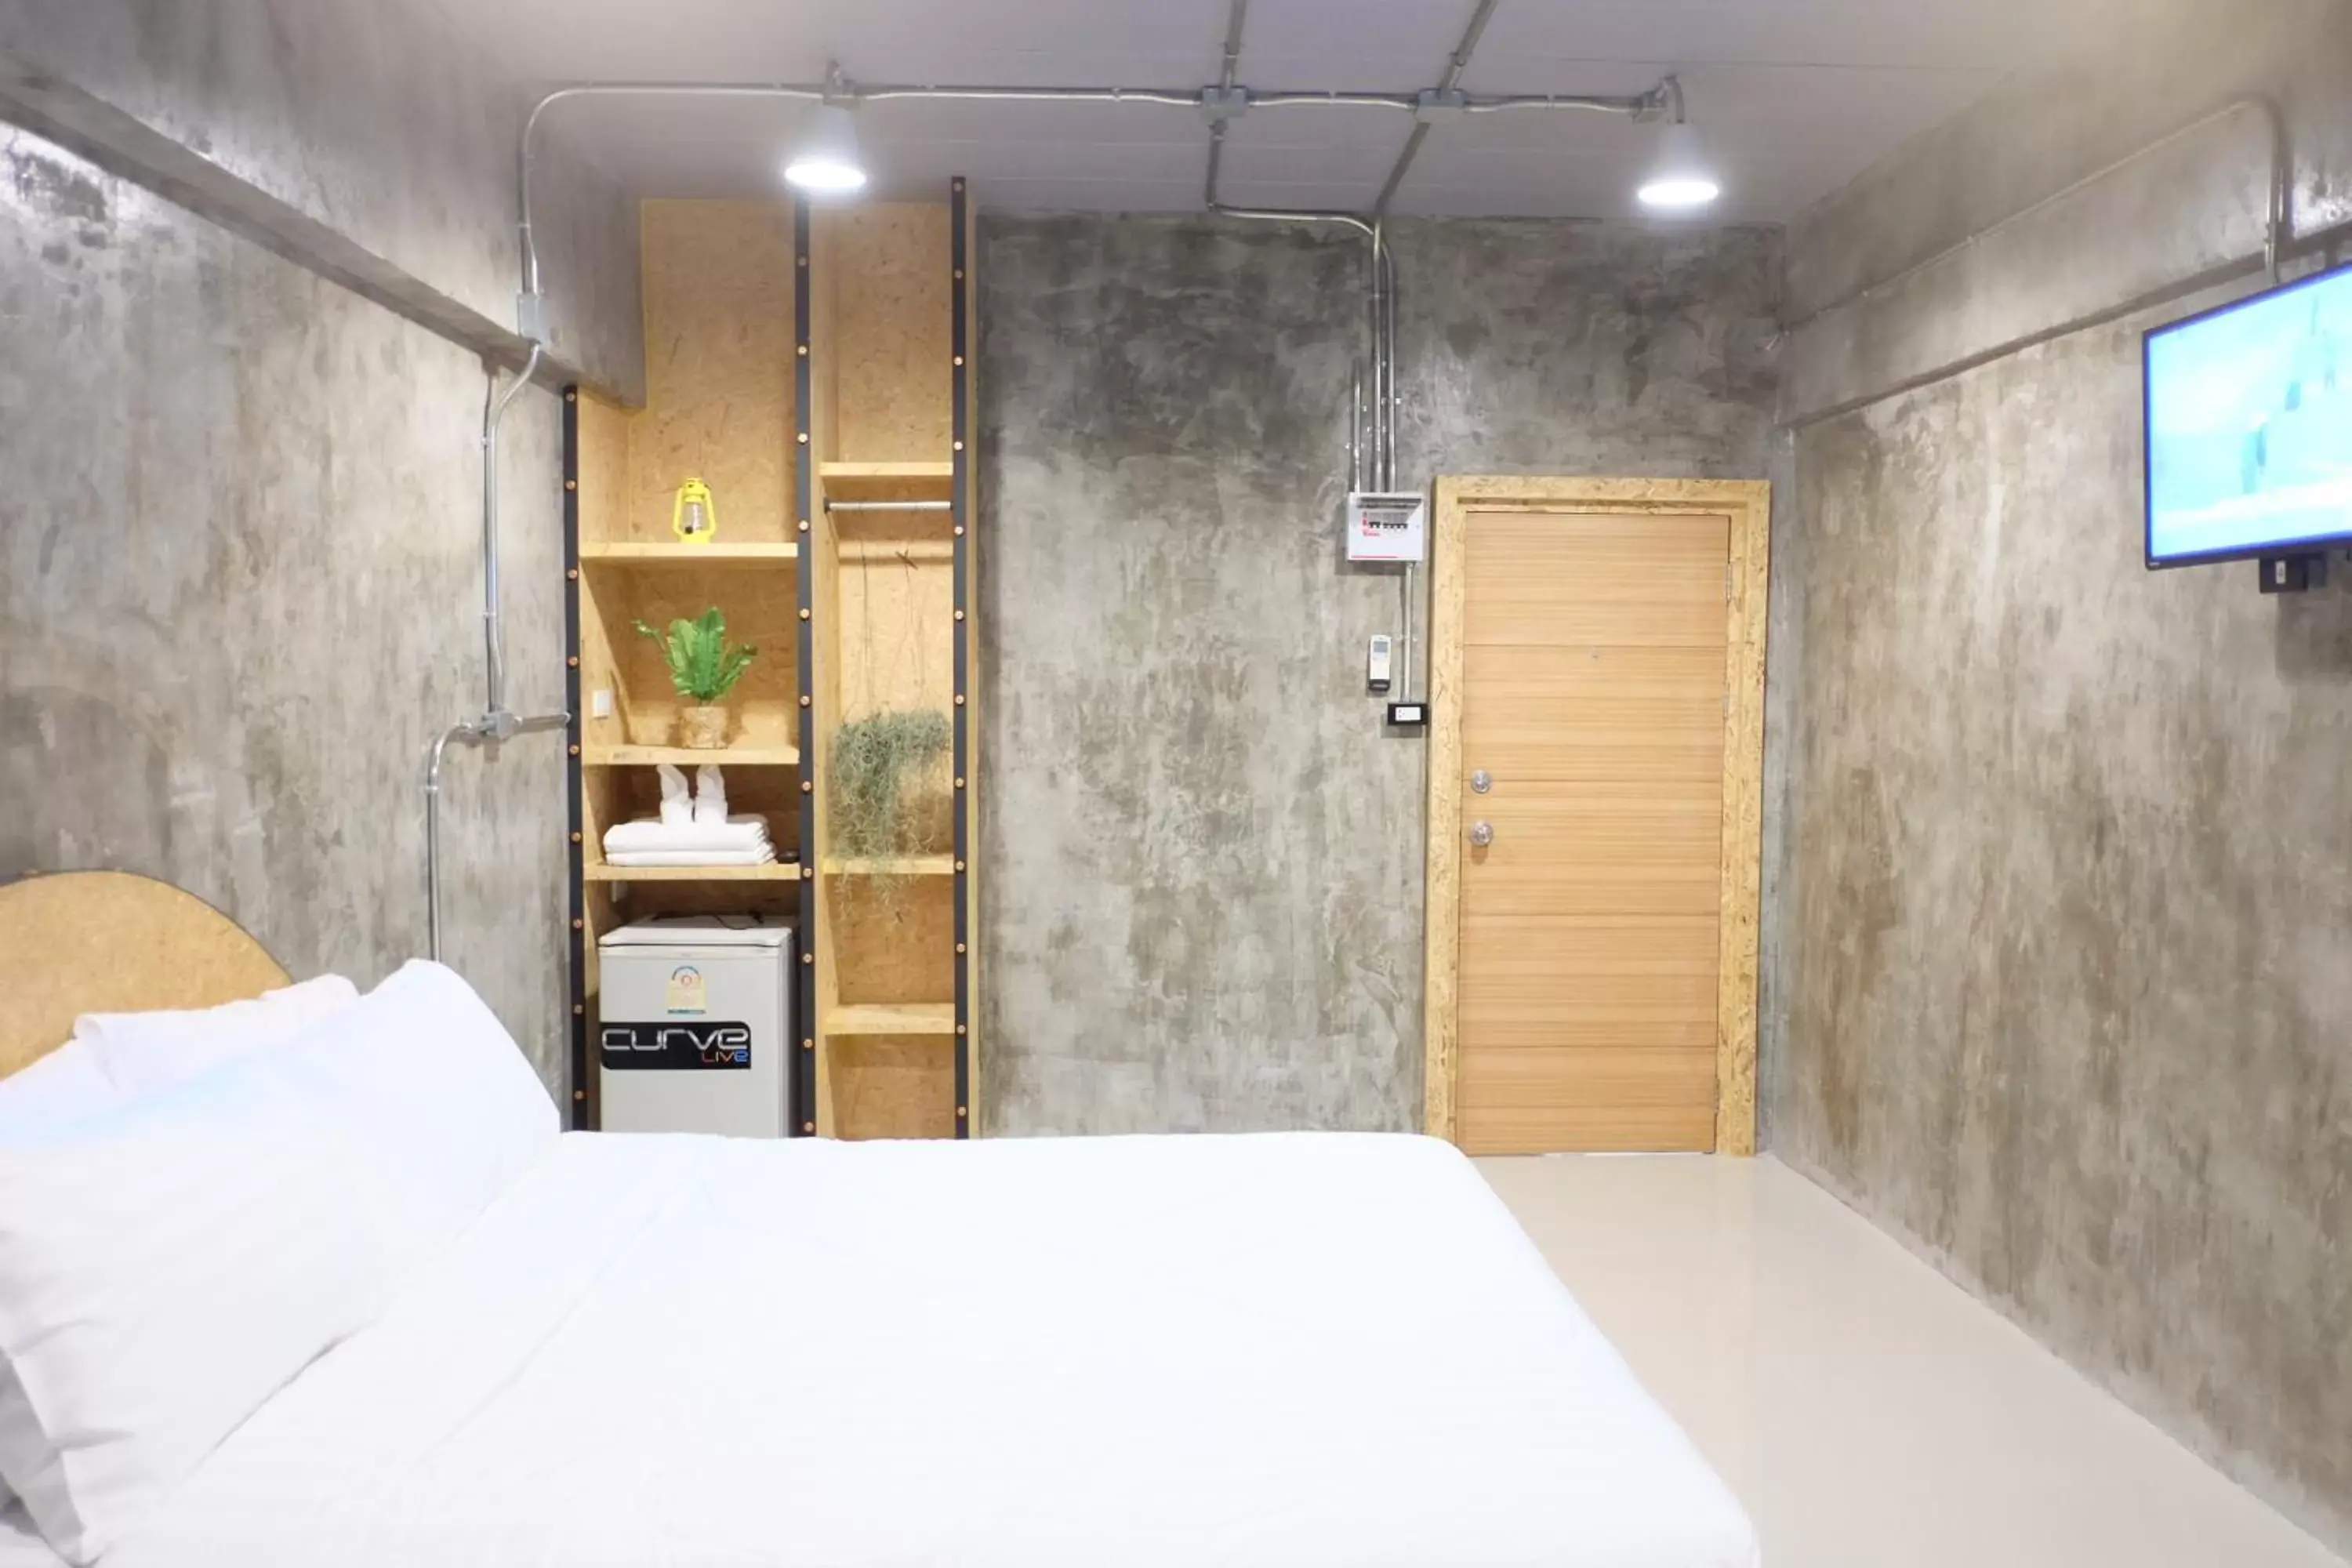 Property building, Room Photo in Area 69 (Don Muang Airport)